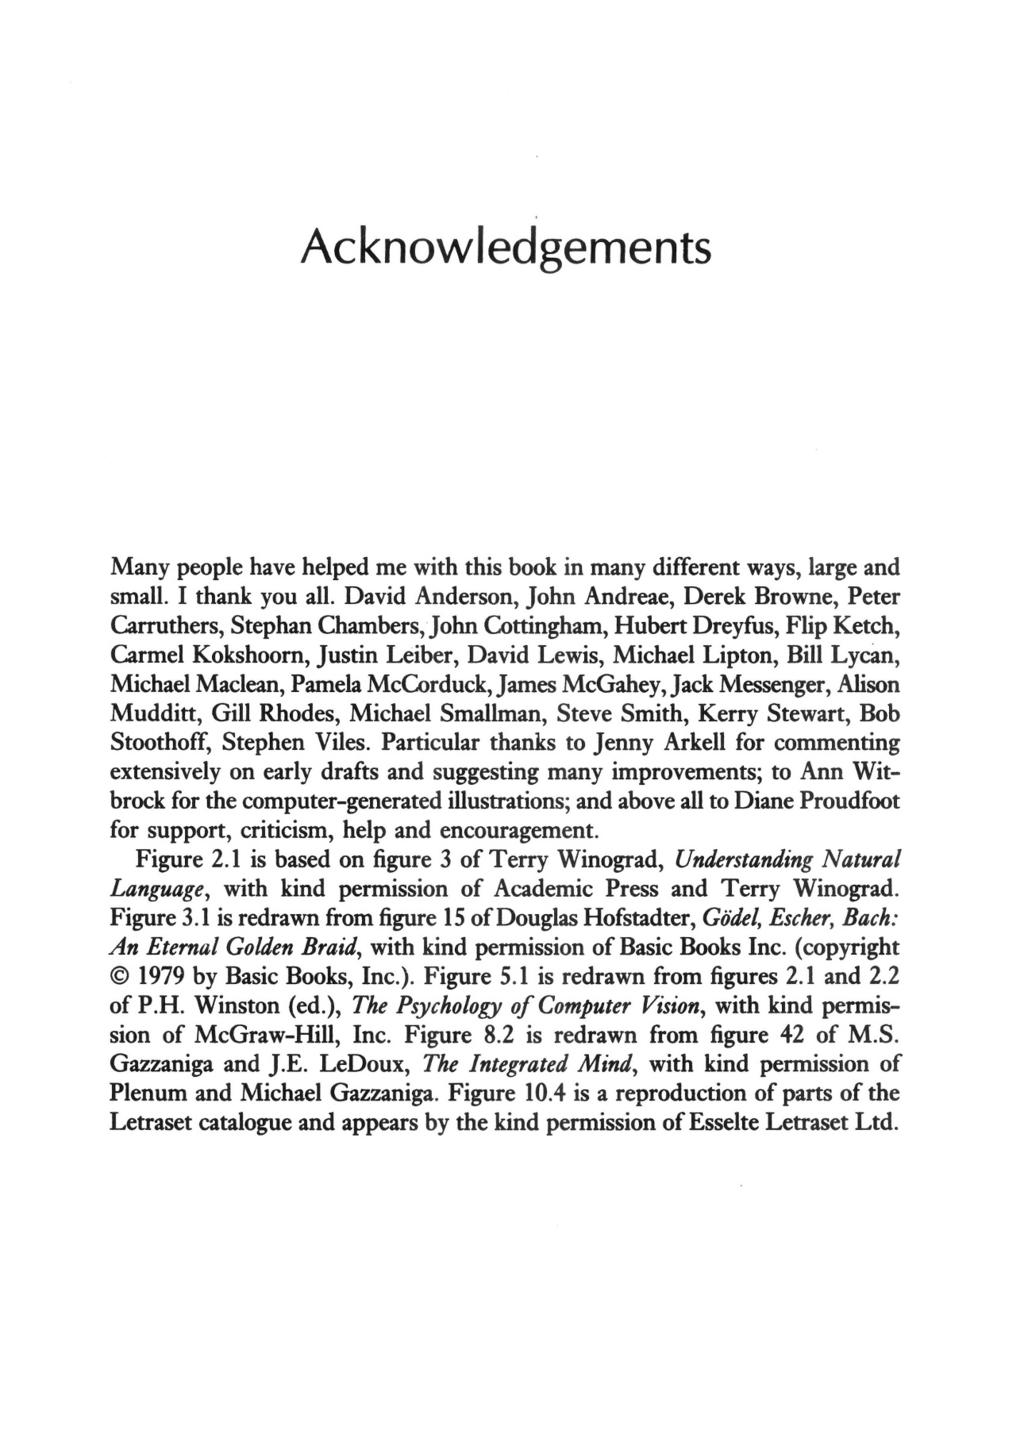 Acknowledgements Many people have helped me with this book in many different ways, large and small. I thank you all.